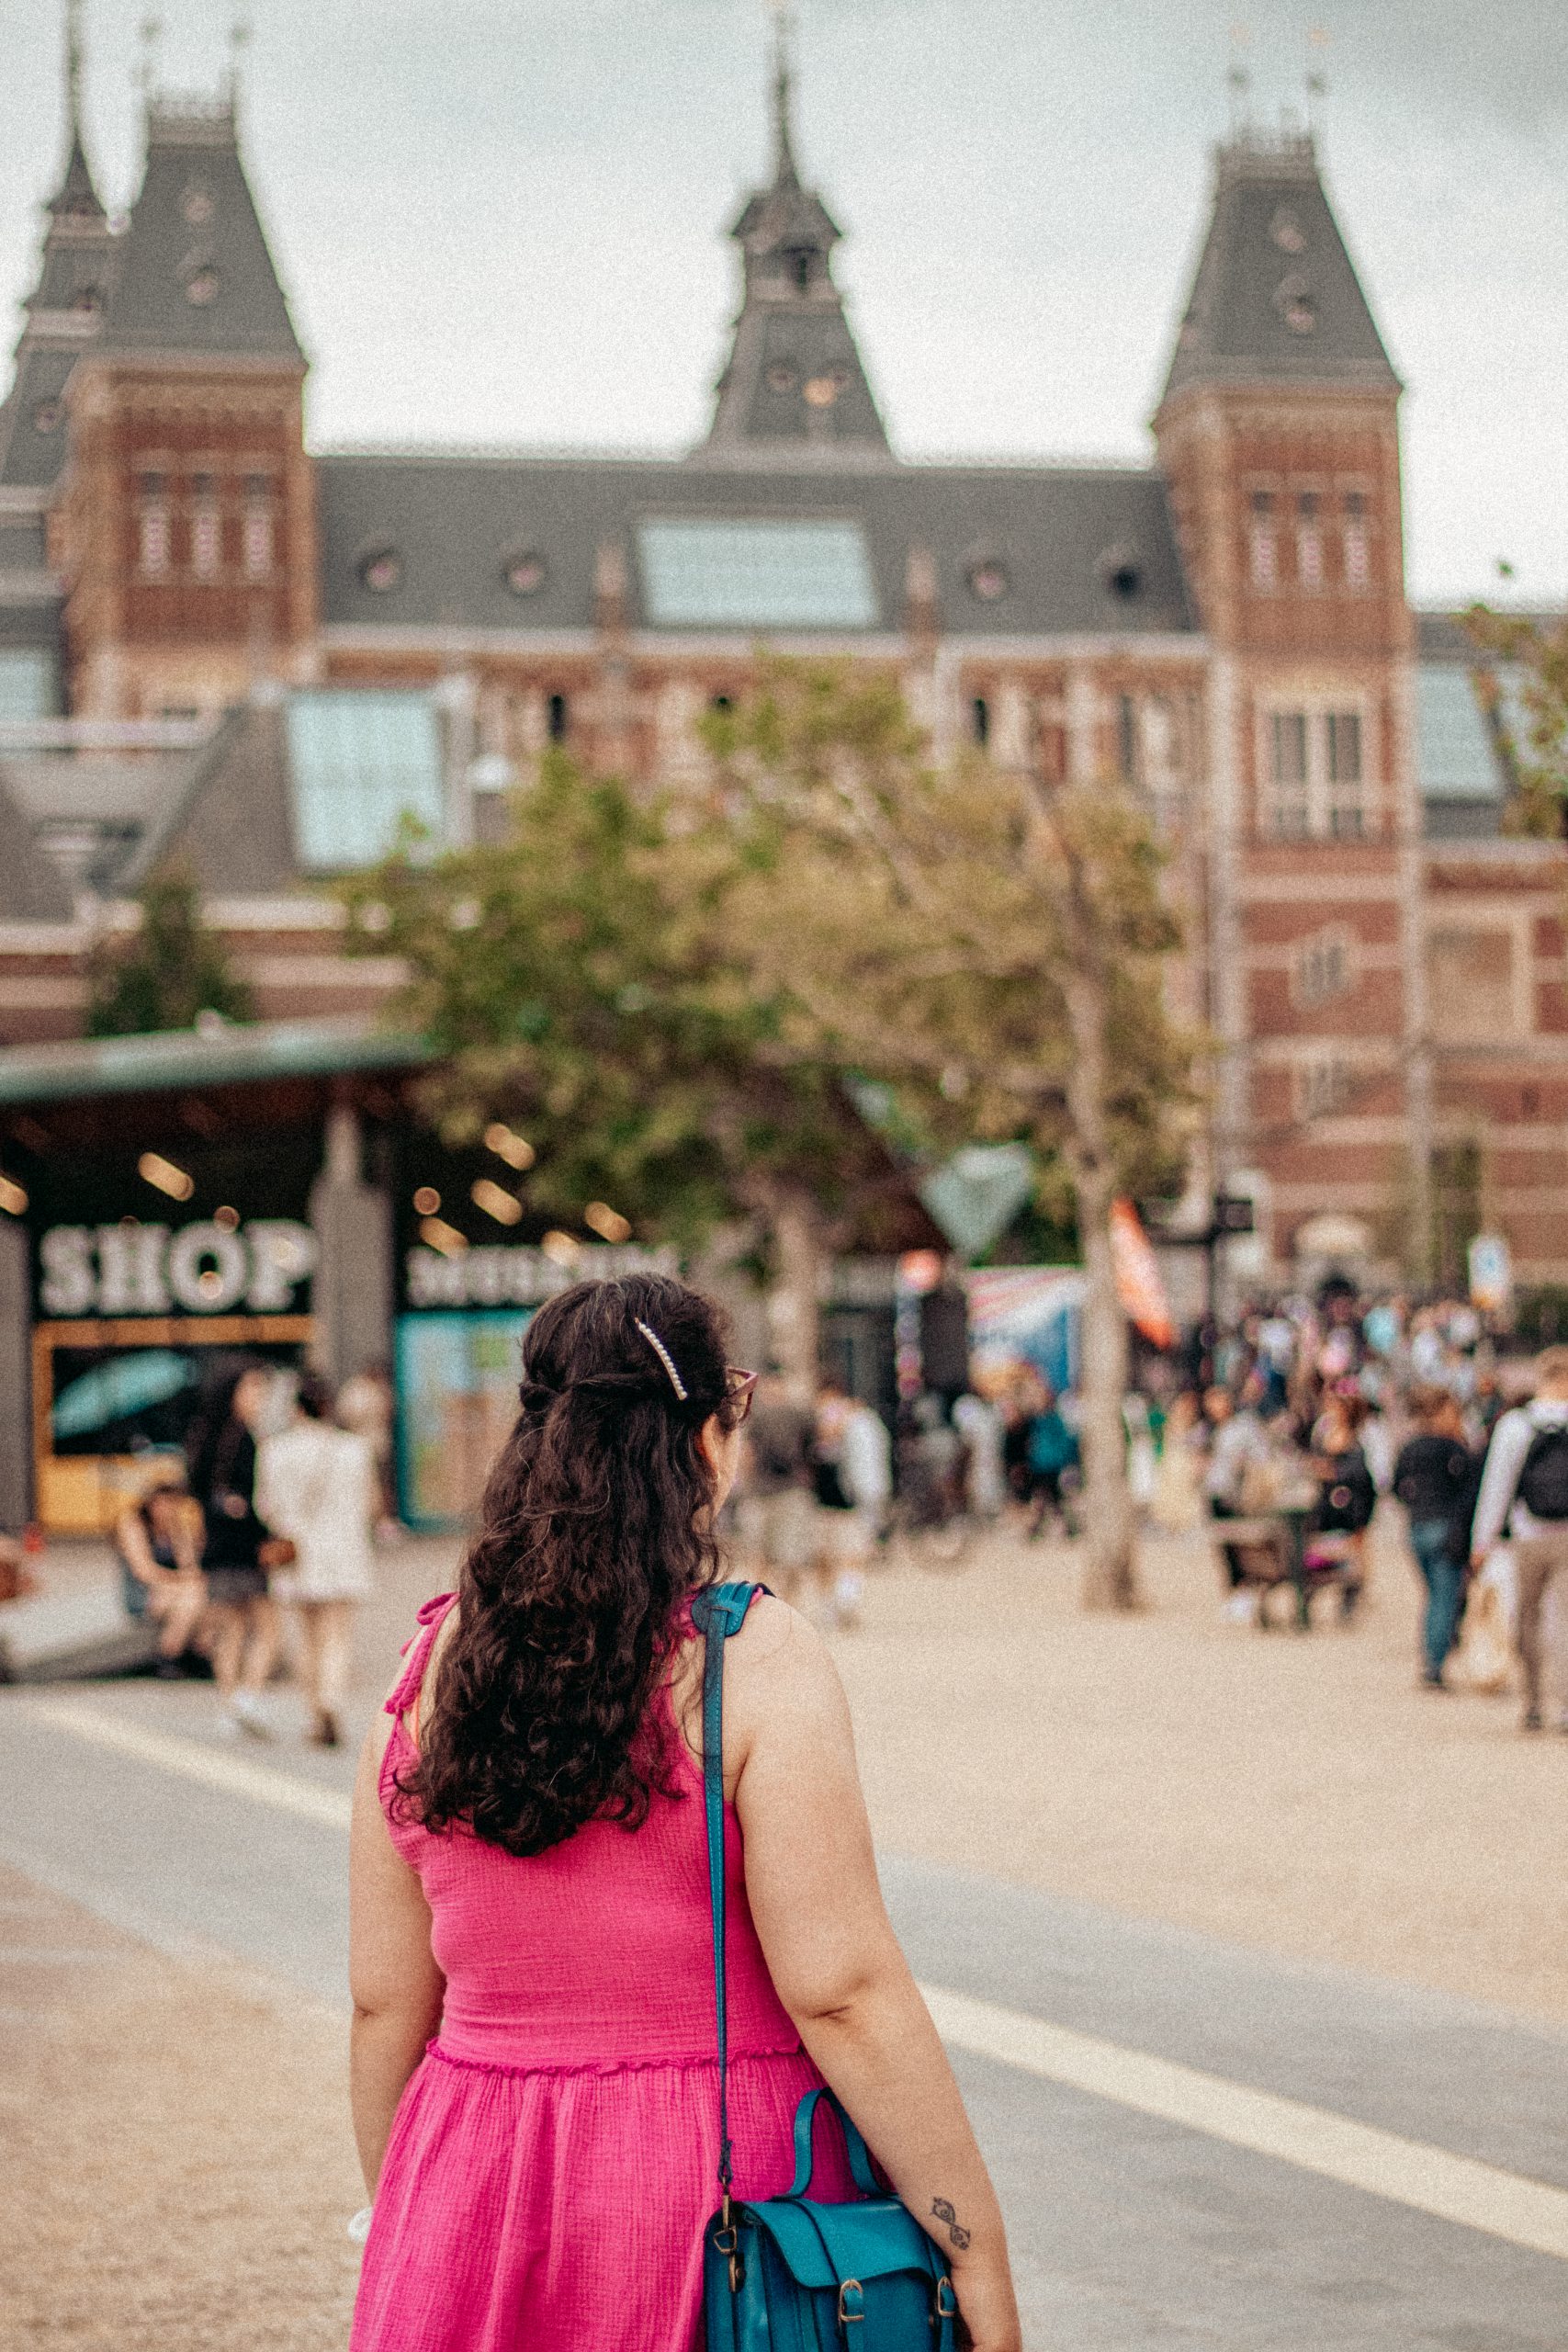 8 Less Talked About Reasons the Netherlands Is a Great Place to Live